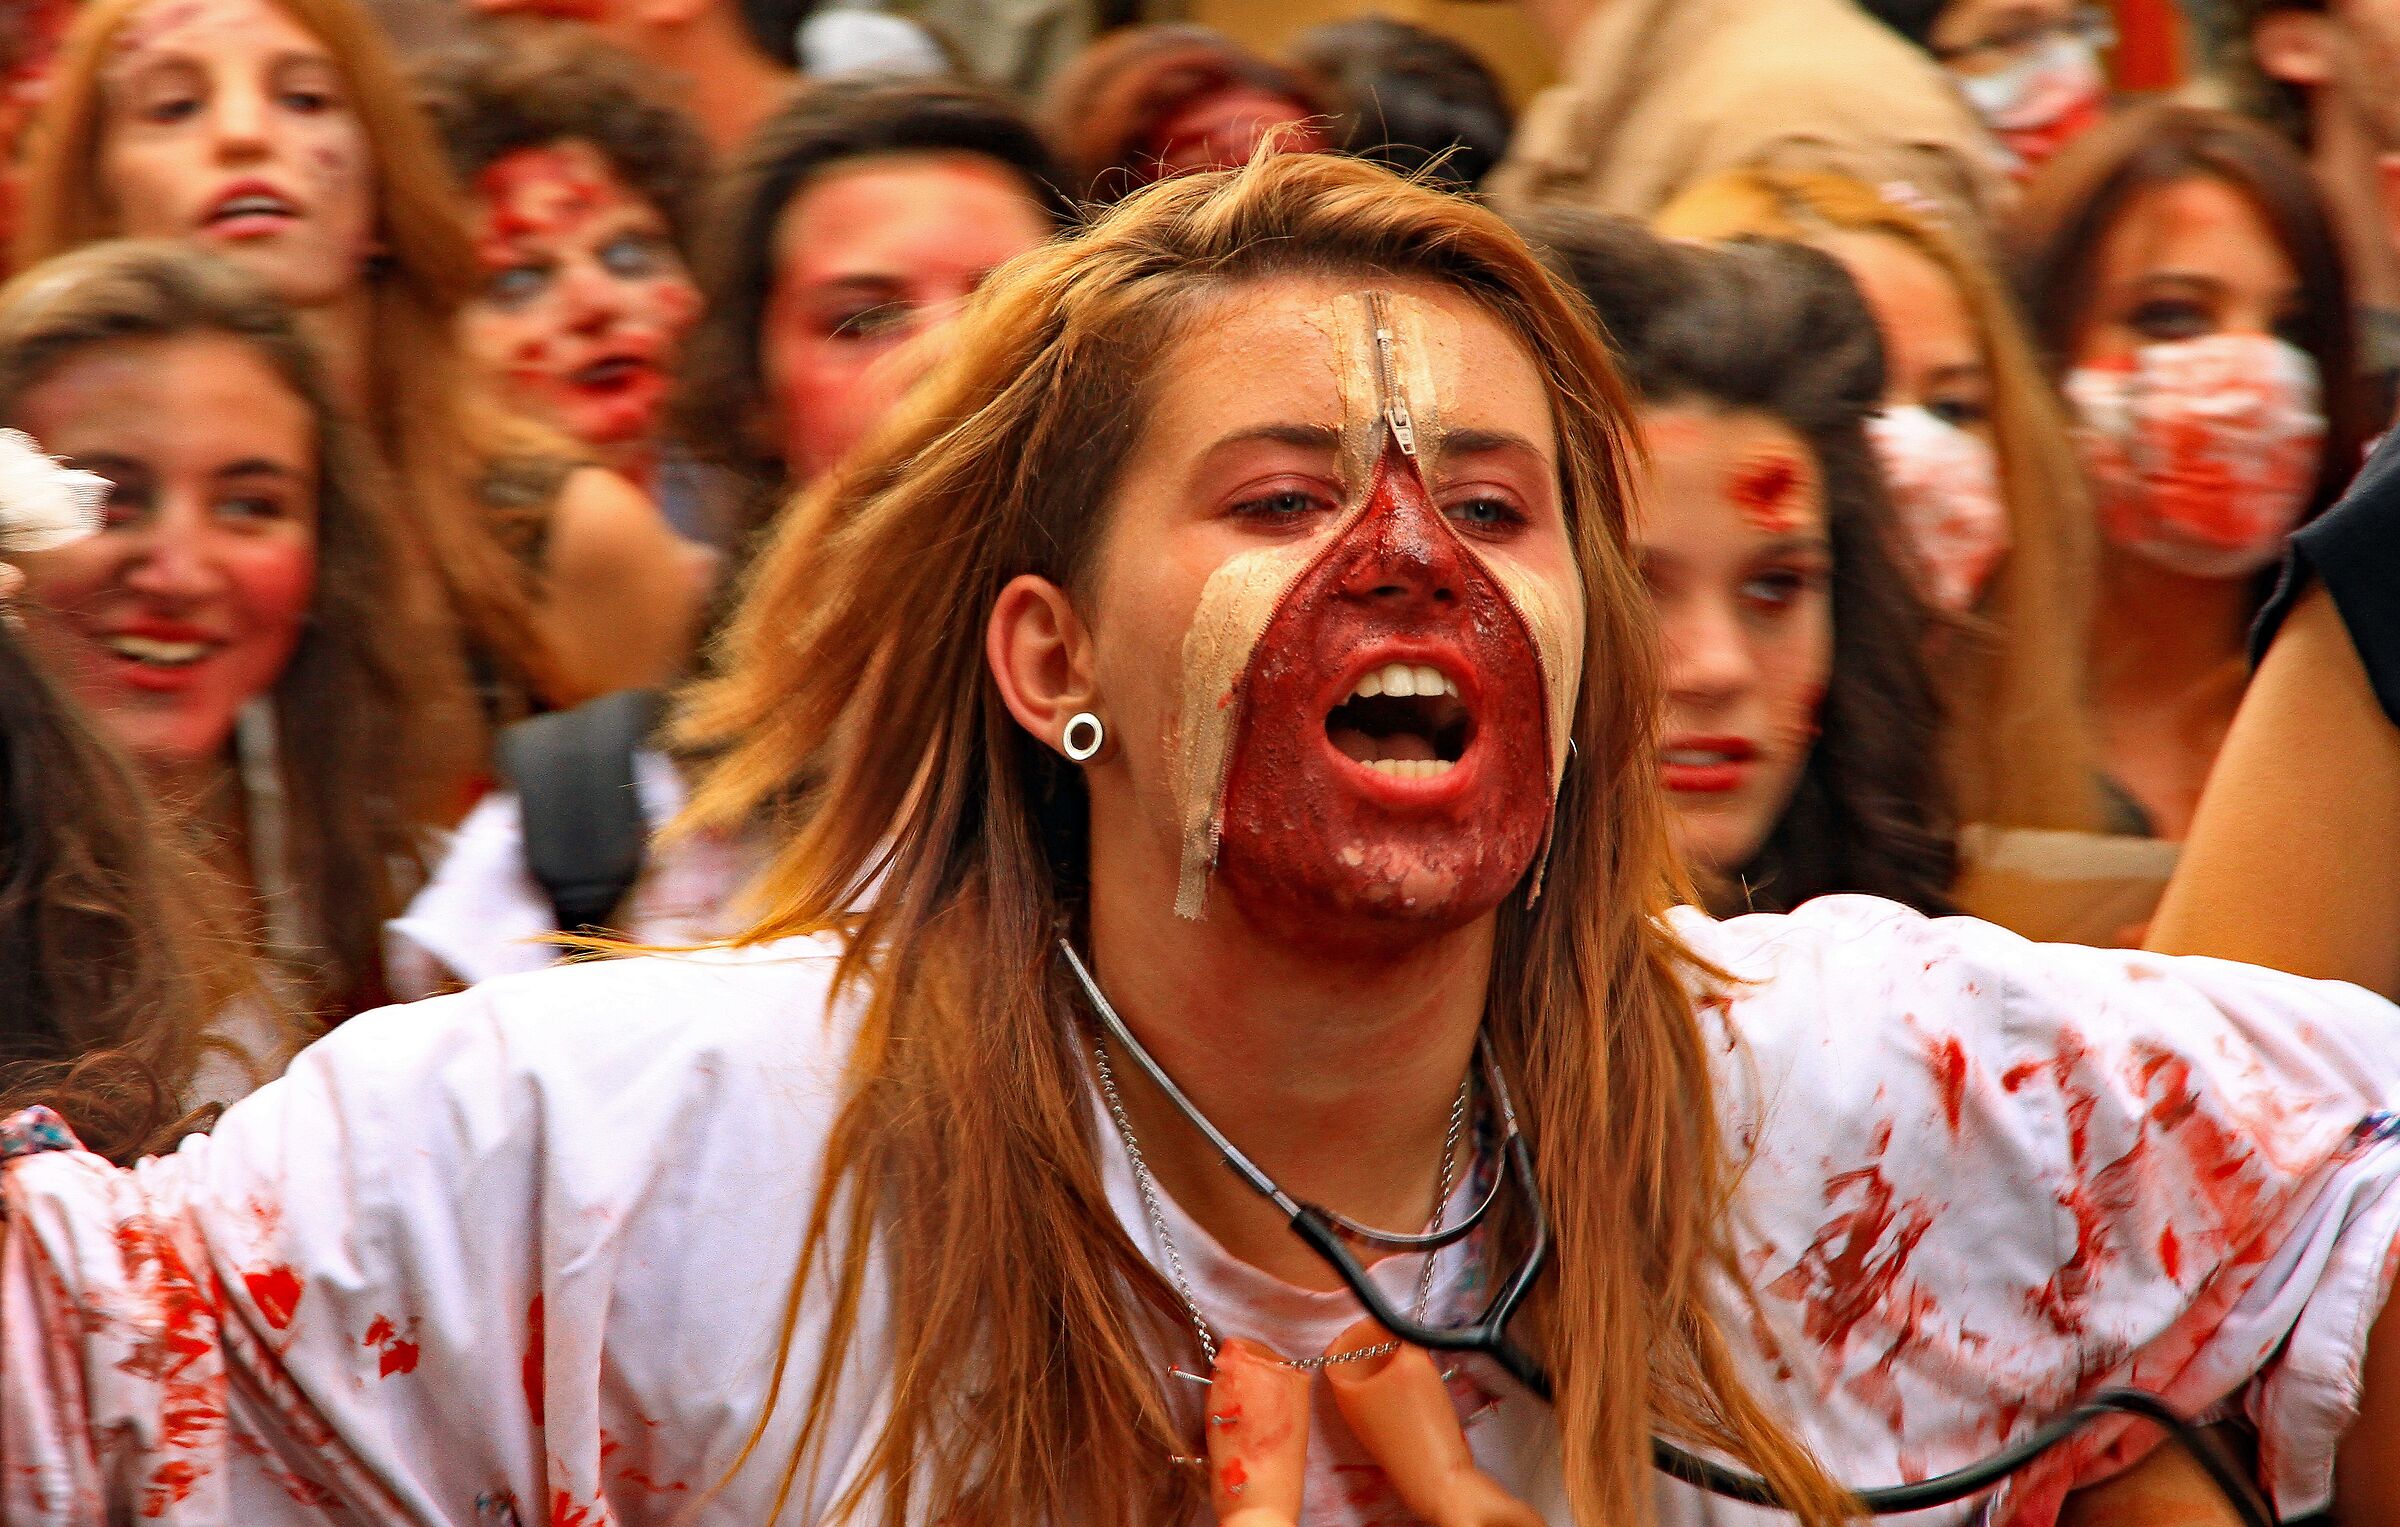 "Zombies" parade in Turin - 2013...